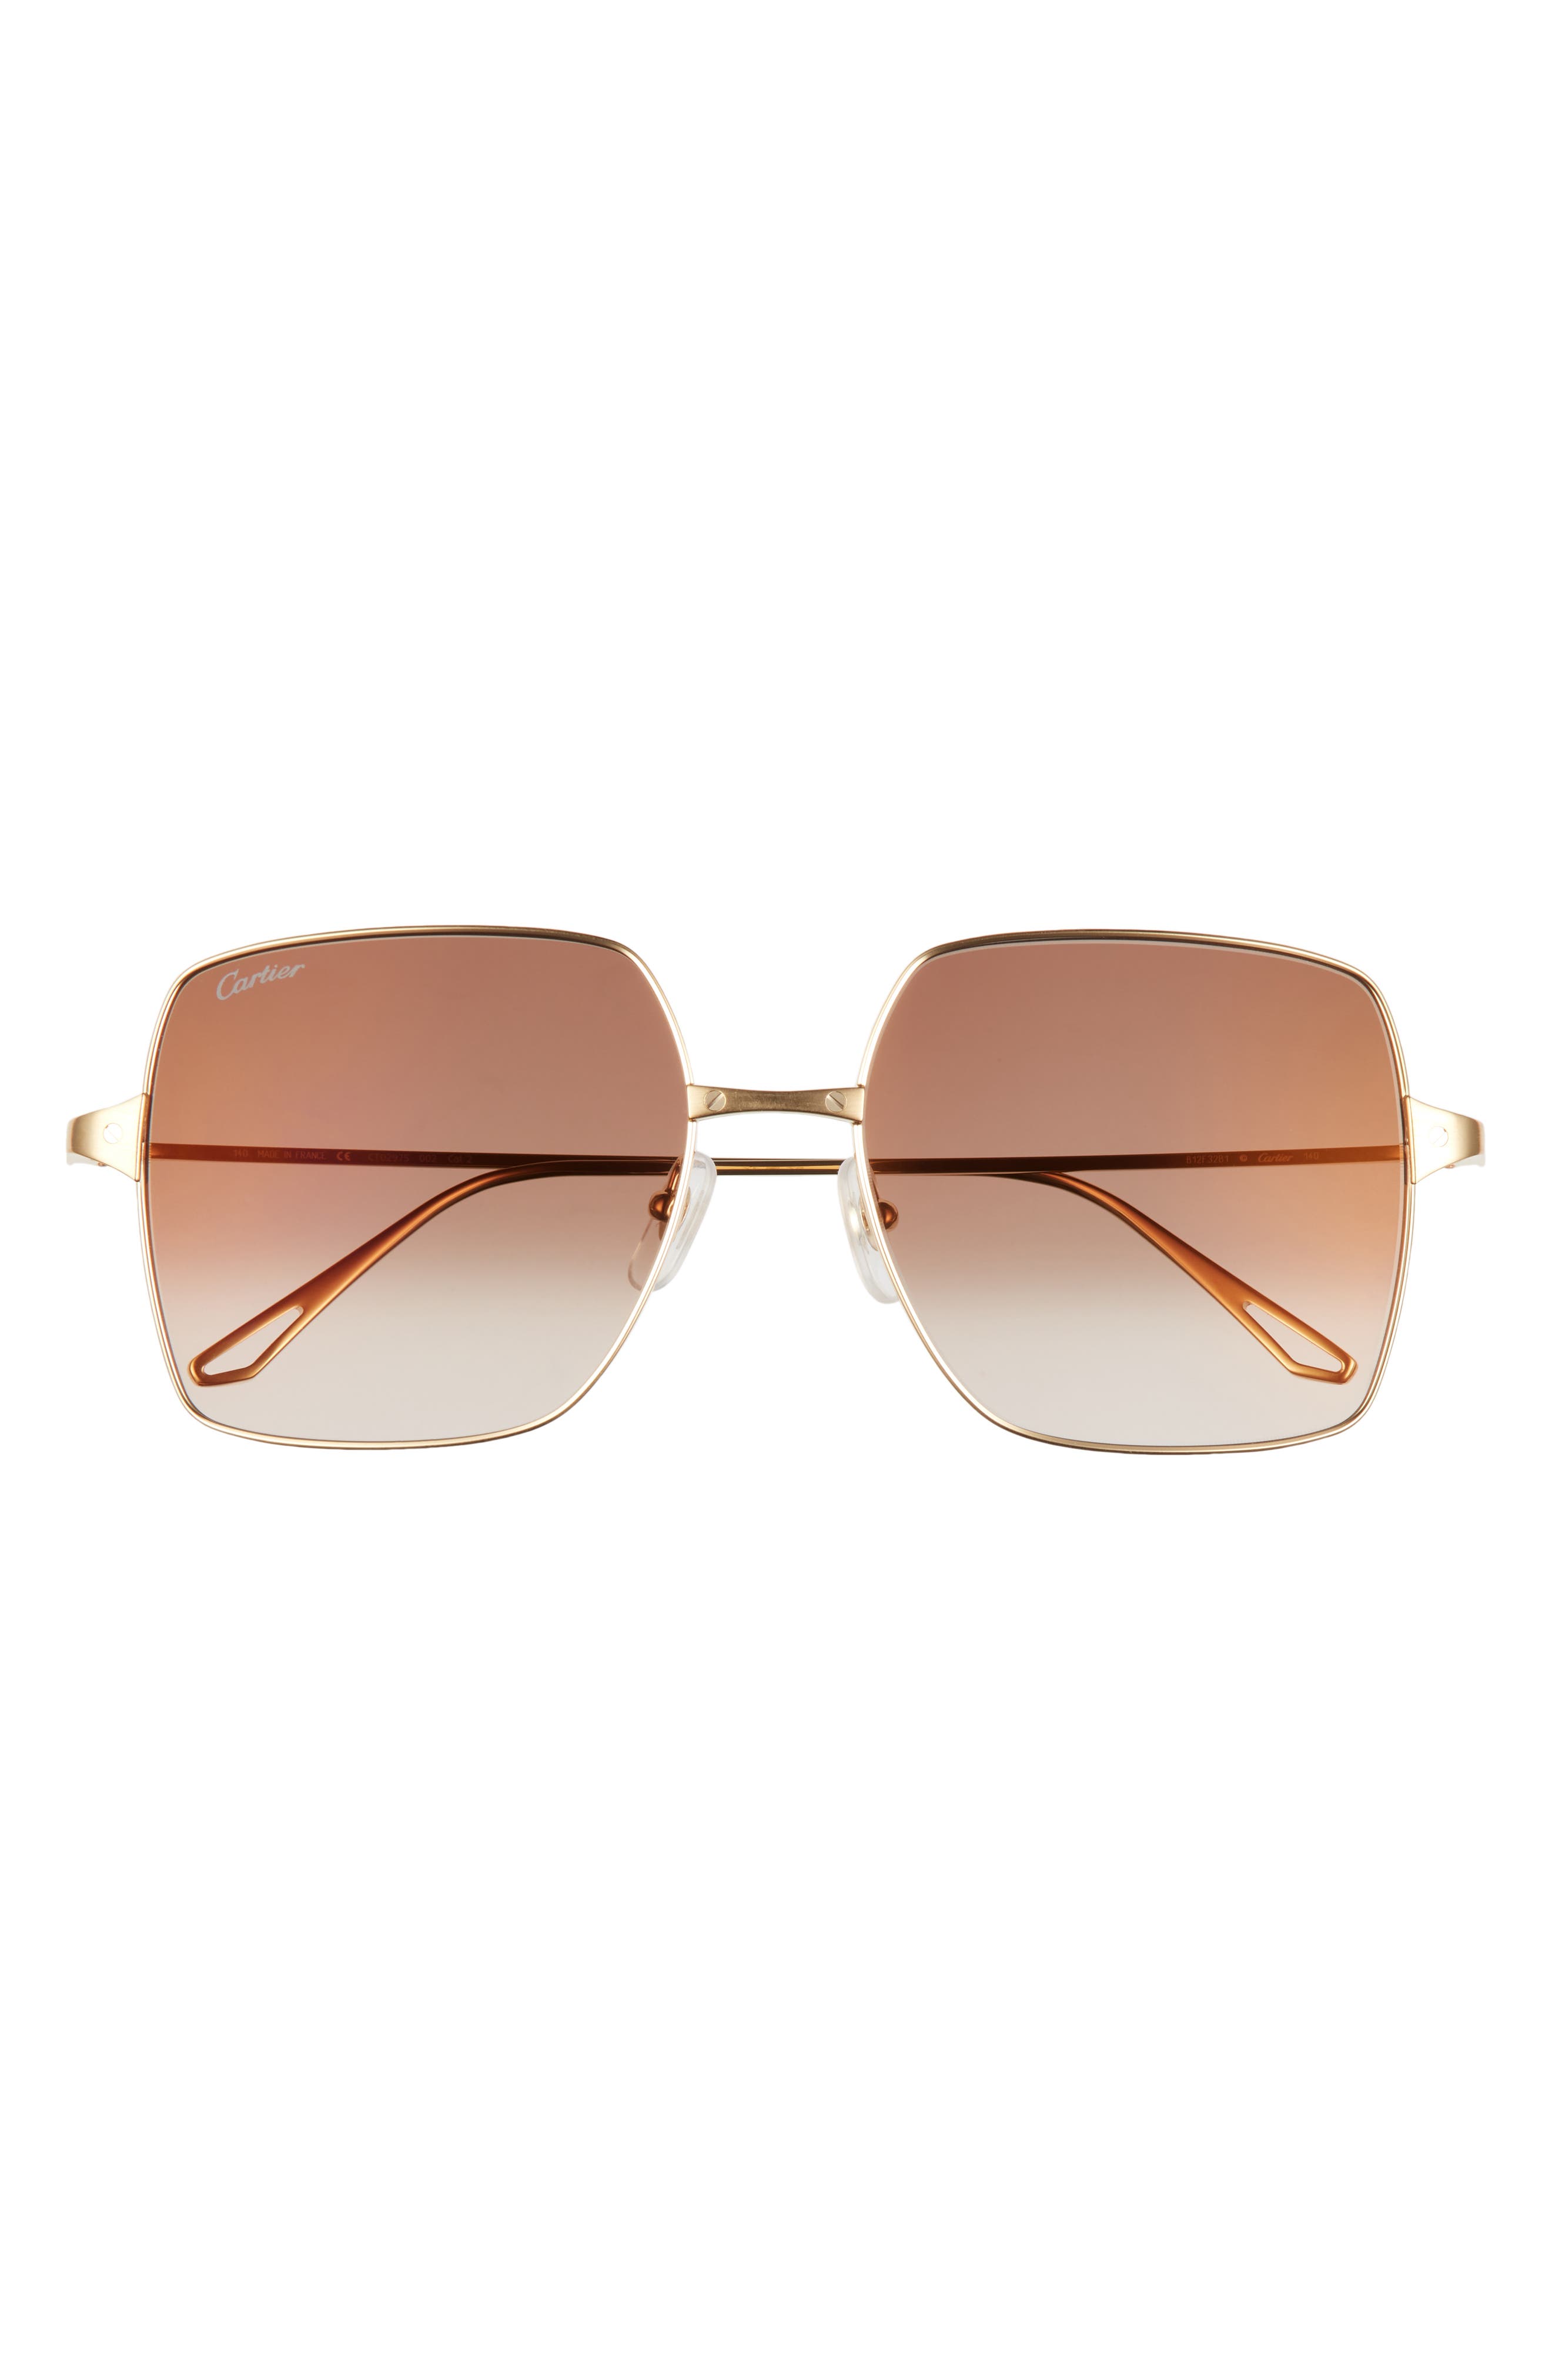 Cartier 57mm Square Sunglasses in Gold/Brown at Nordstrom